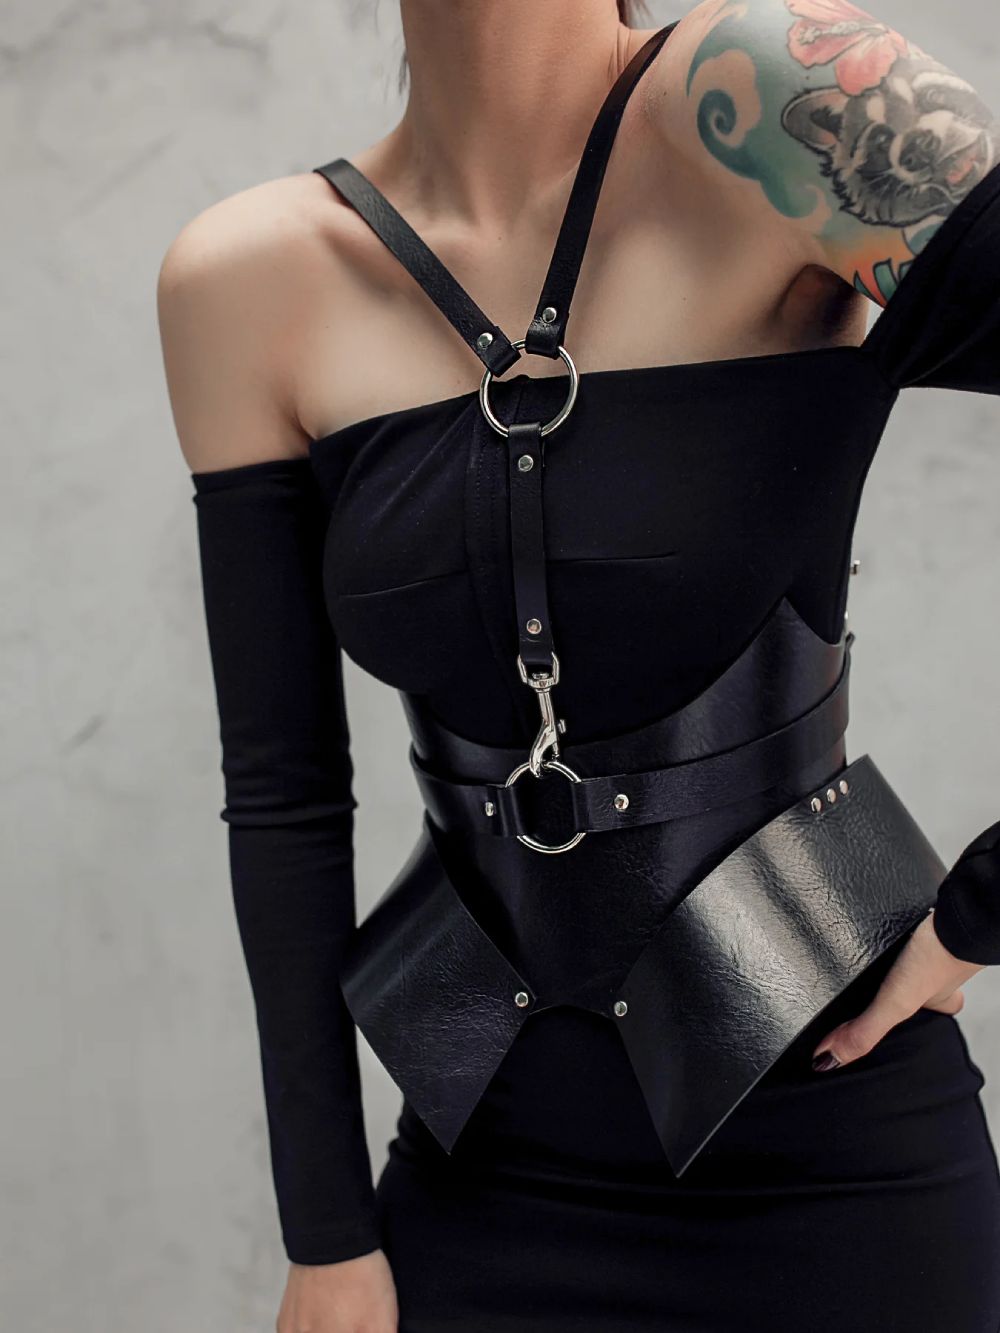 how-to-make-a-leather-corset-belt-7